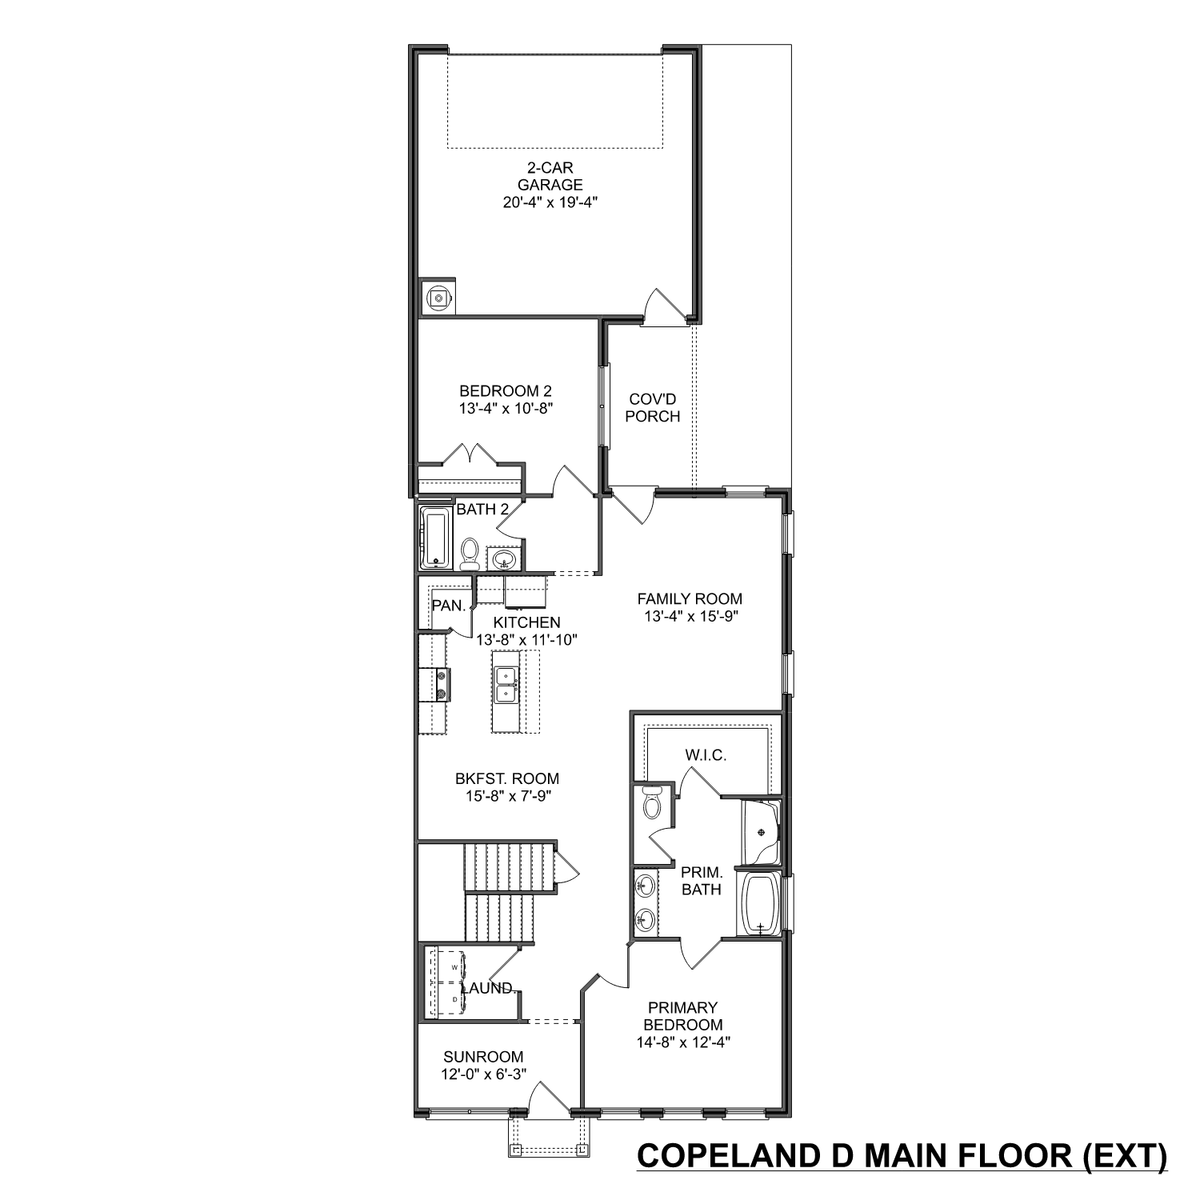 1 - The Copeland D buildable floor plan layout in Davidson Homes' Barnett's Crossing community.